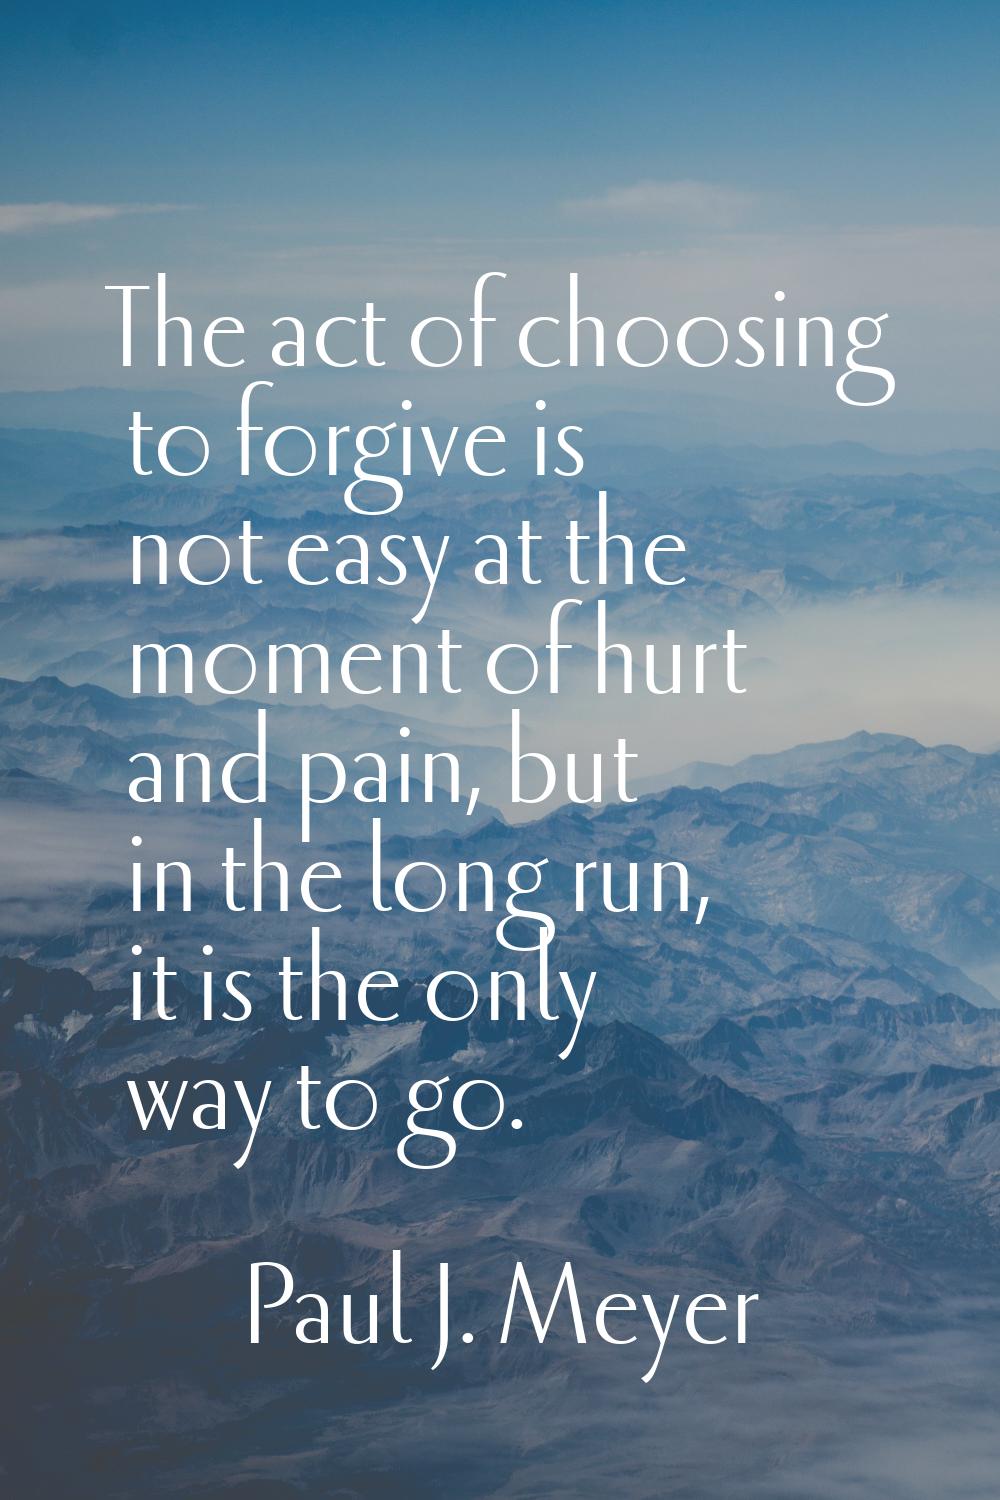 The act of choosing to forgive is not easy at the moment of hurt and pain, but in the long run, it 